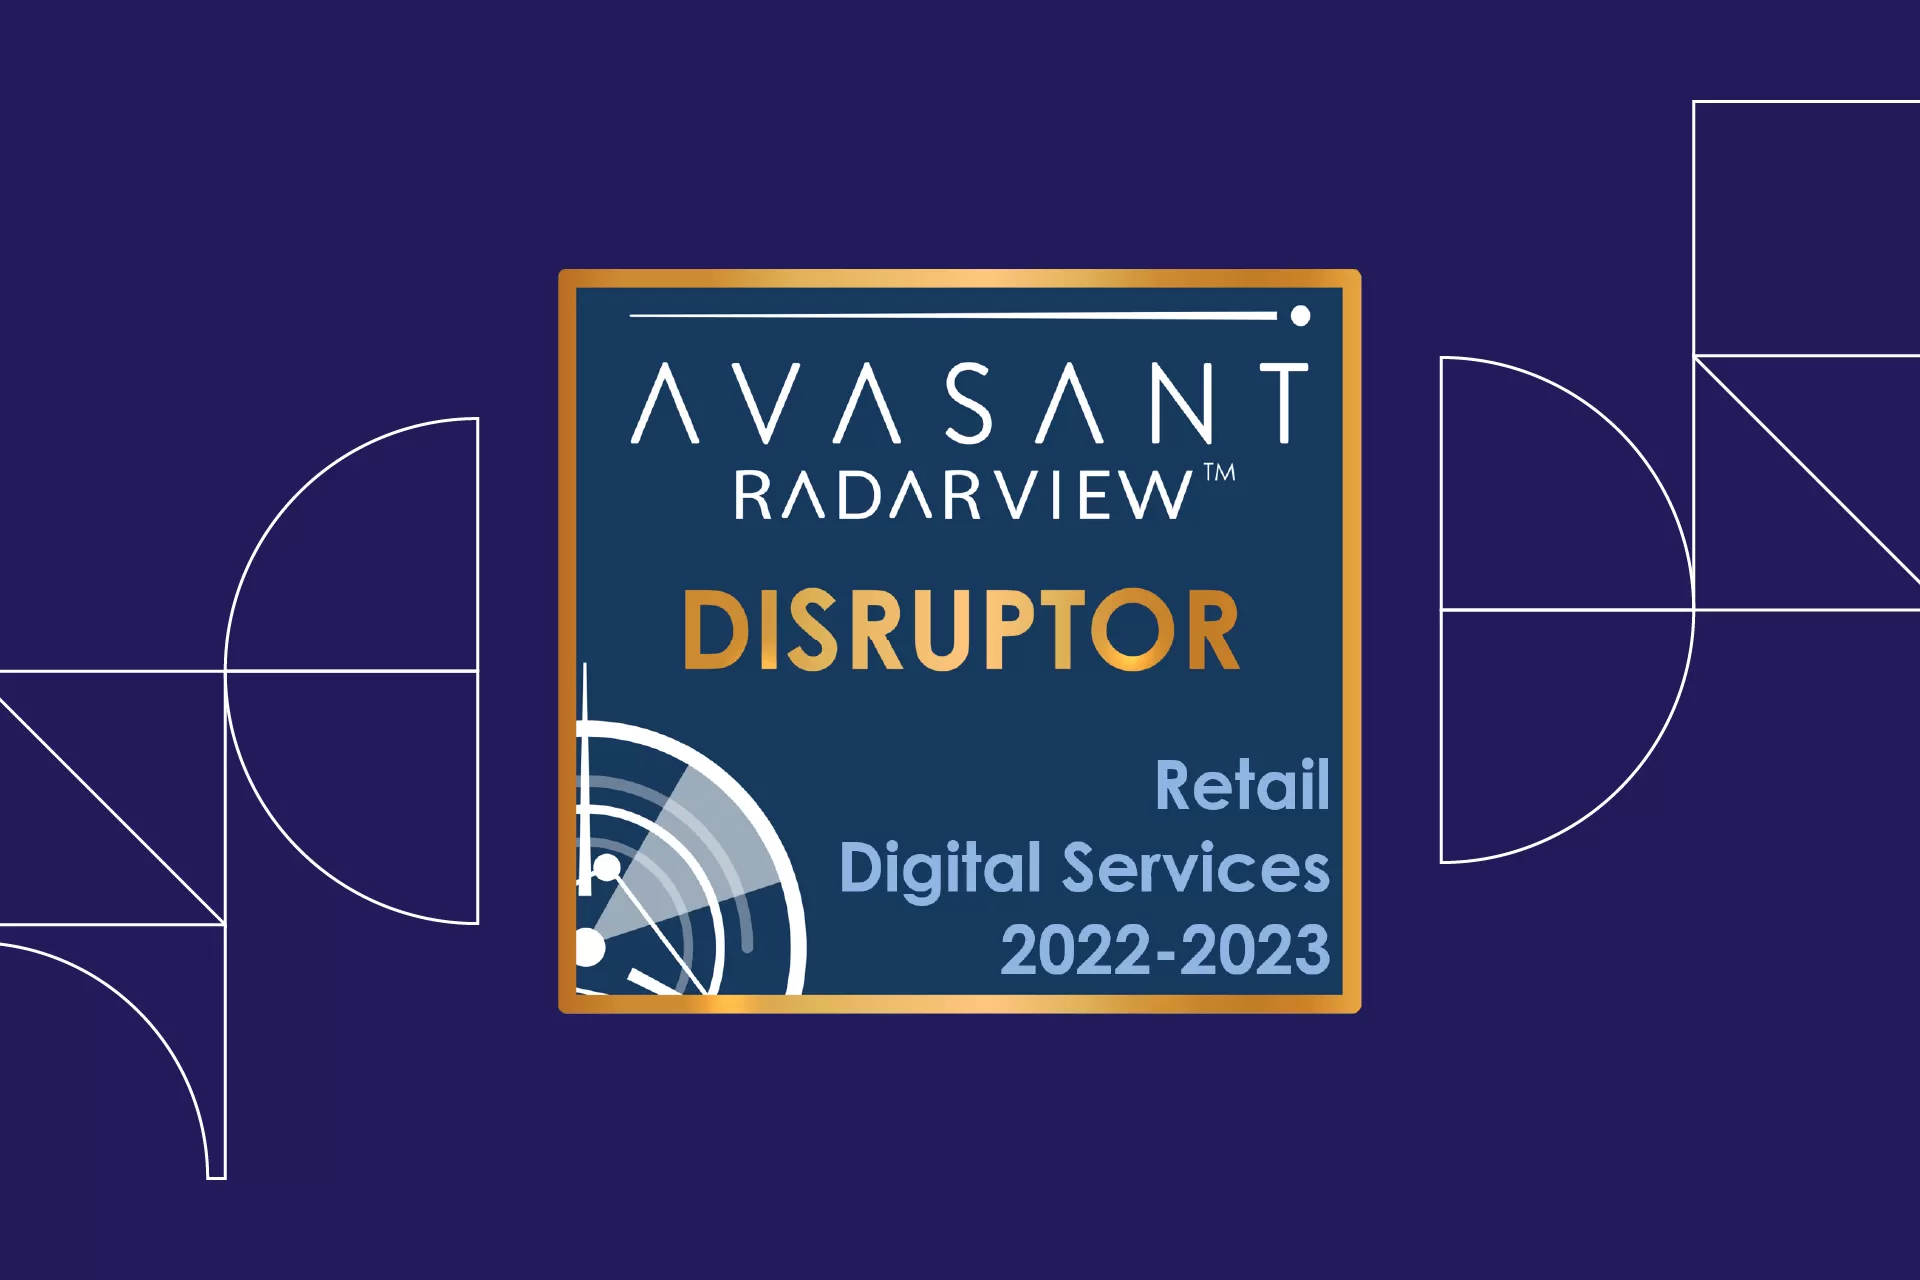 Zensar recognized as “Disruptor” in Avasant Retail Digital Services 2022-23